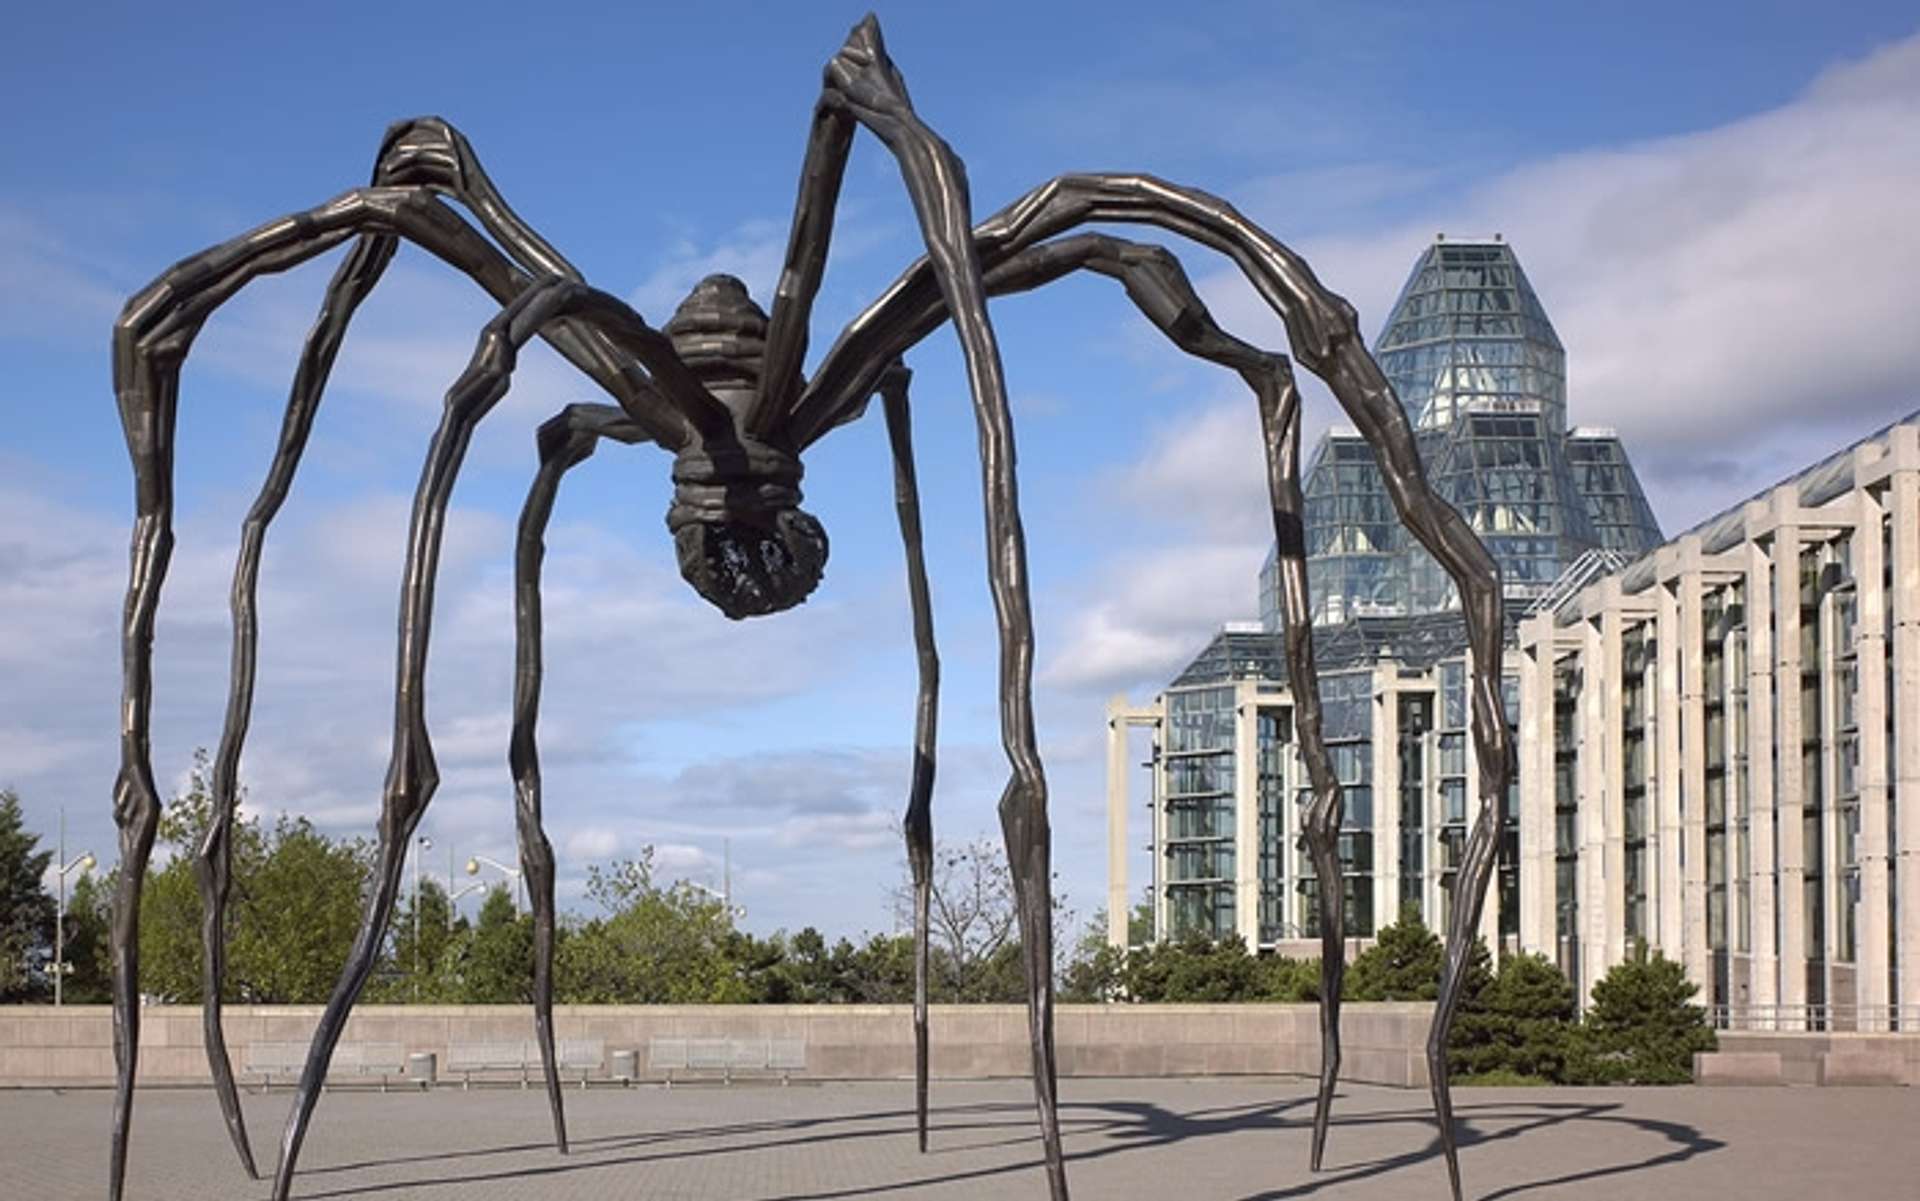 Sculpture of a black spider over thirty feet tall in front of a city landscape